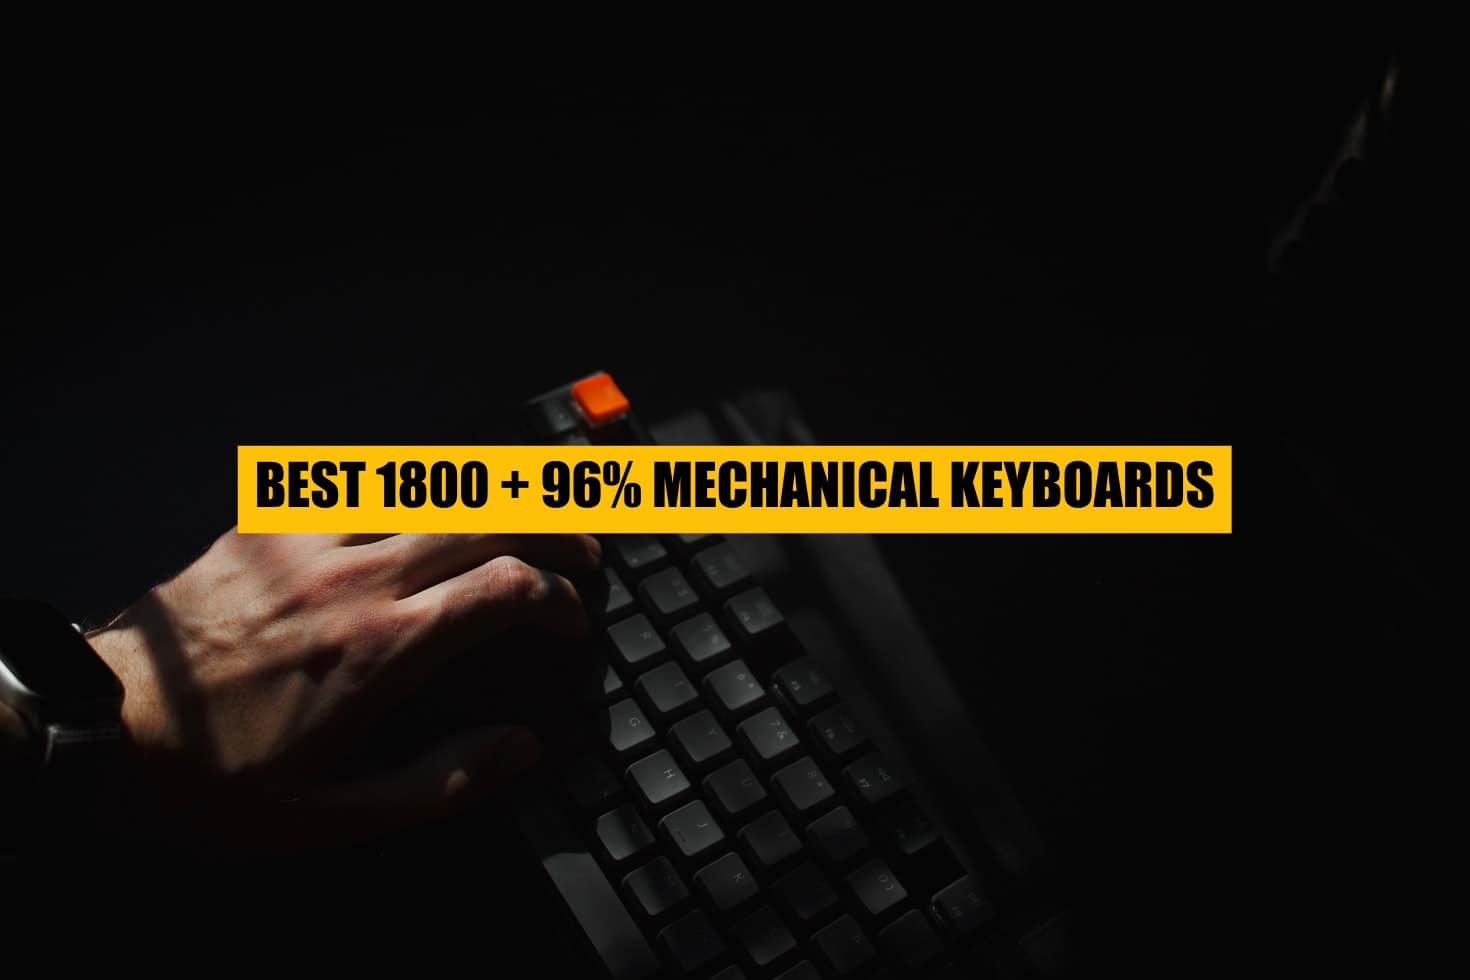 96 percent and 1800 compact layout mechanical keyboards